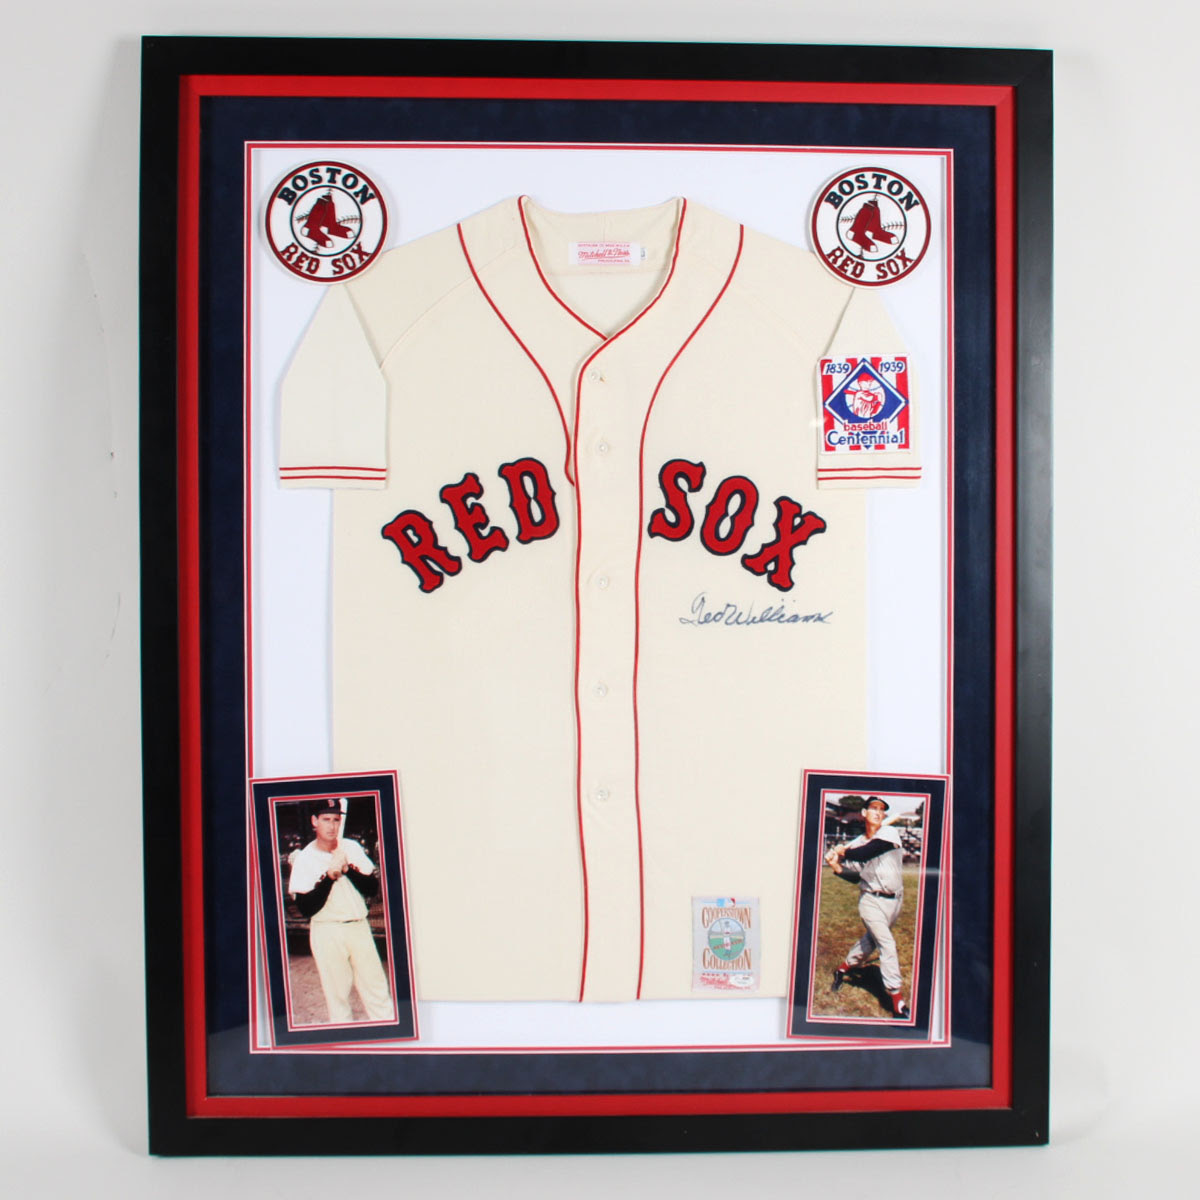 Ted Williams Signed Jersey Red Sox Display - COA JSA